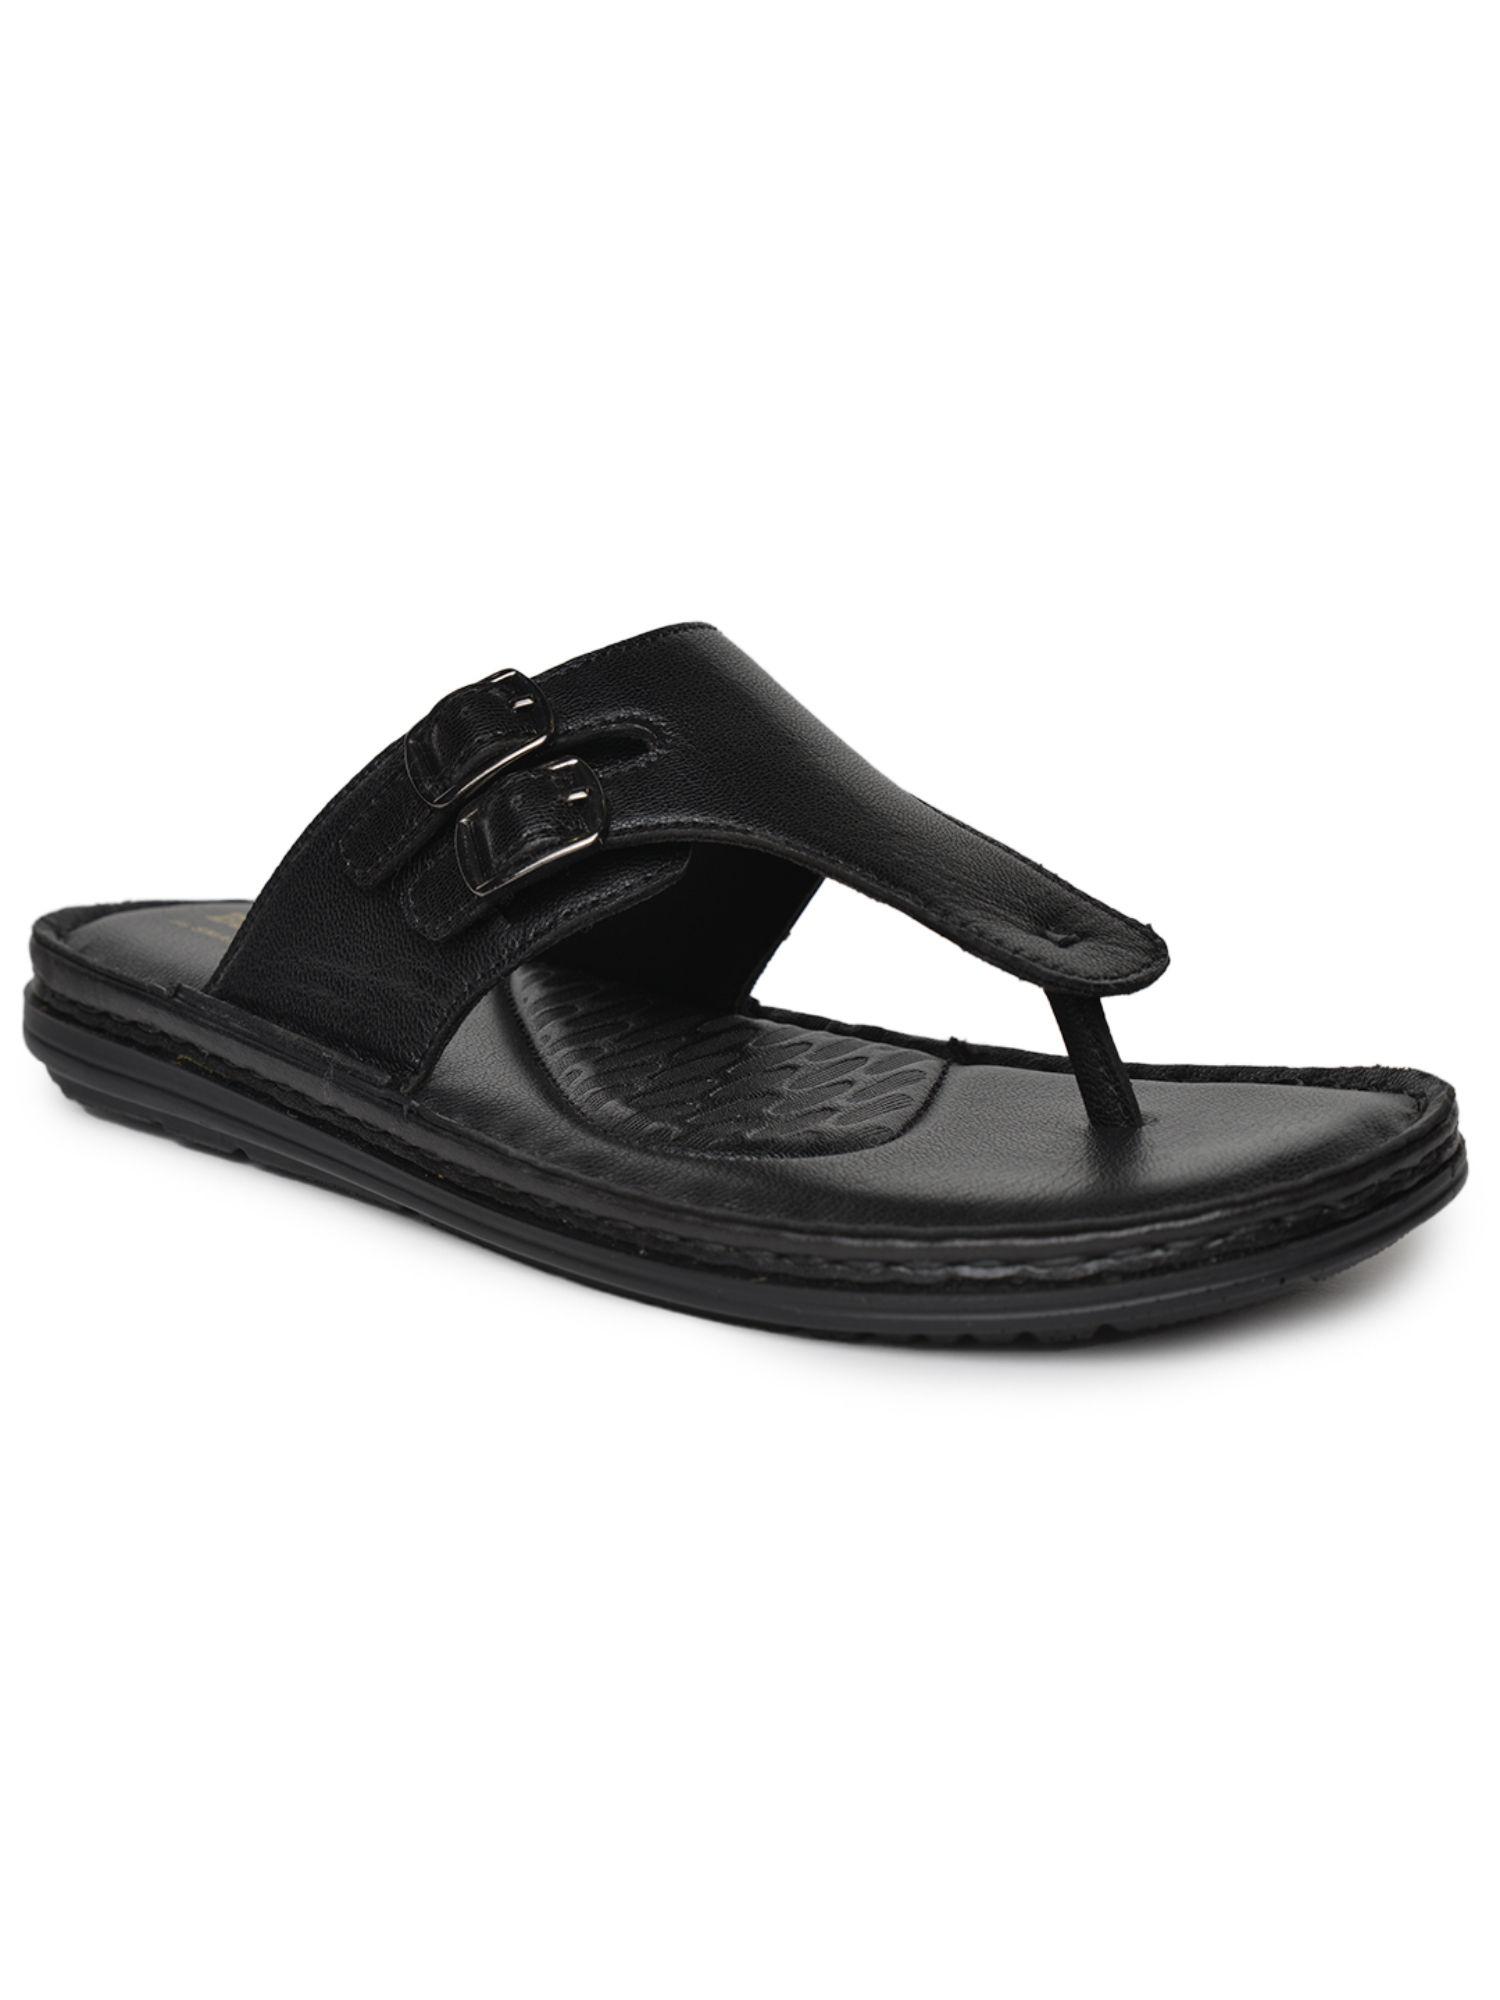 ace-full-grain-natural-leather-black-casual-sandal-chappal